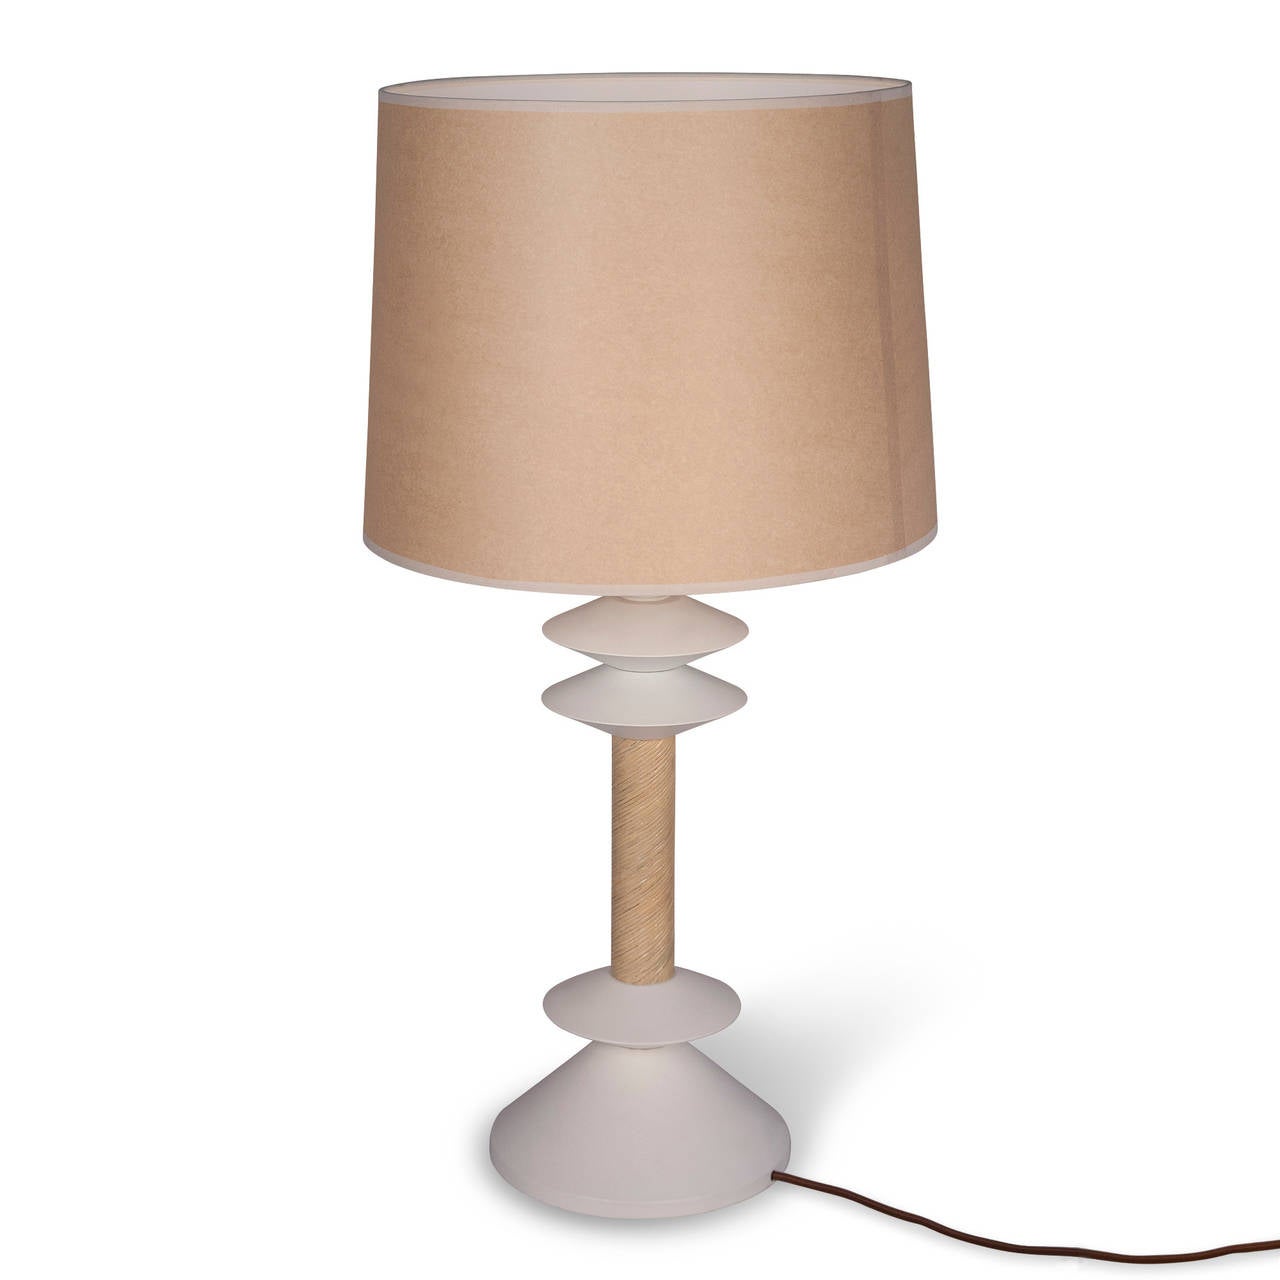 Jay Spectre Table Lamp In Excellent Condition For Sale In Brooklyn, NY